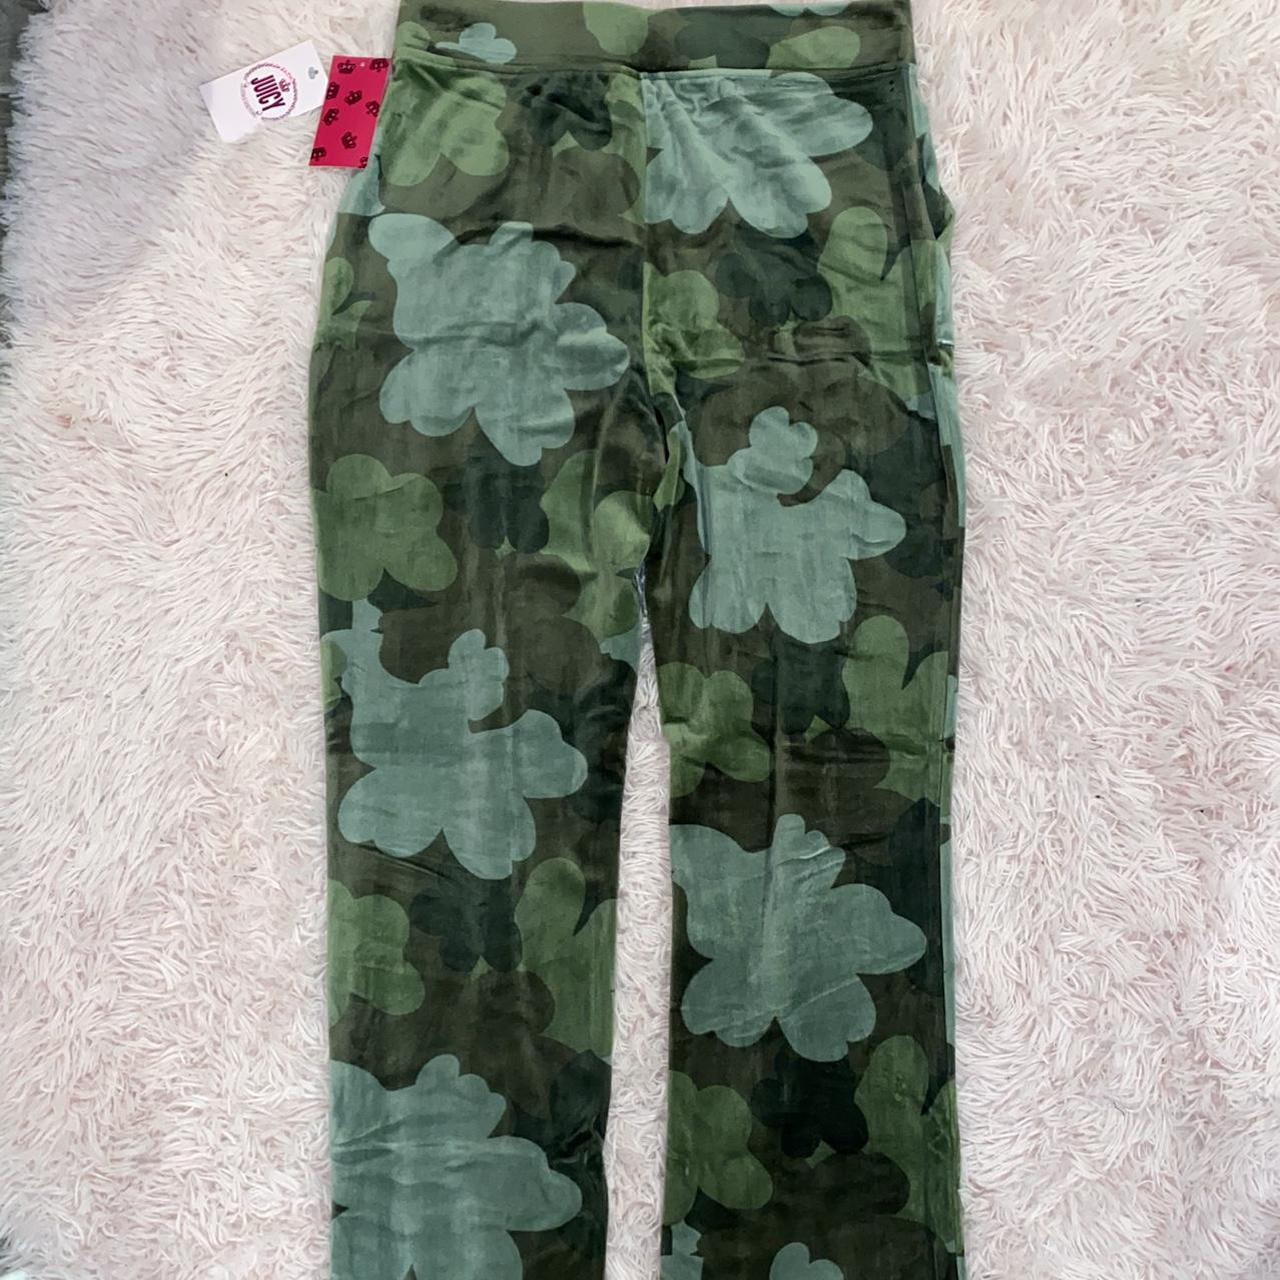 Juicy Couture Track Pants & Joggers for Women - Poshmark